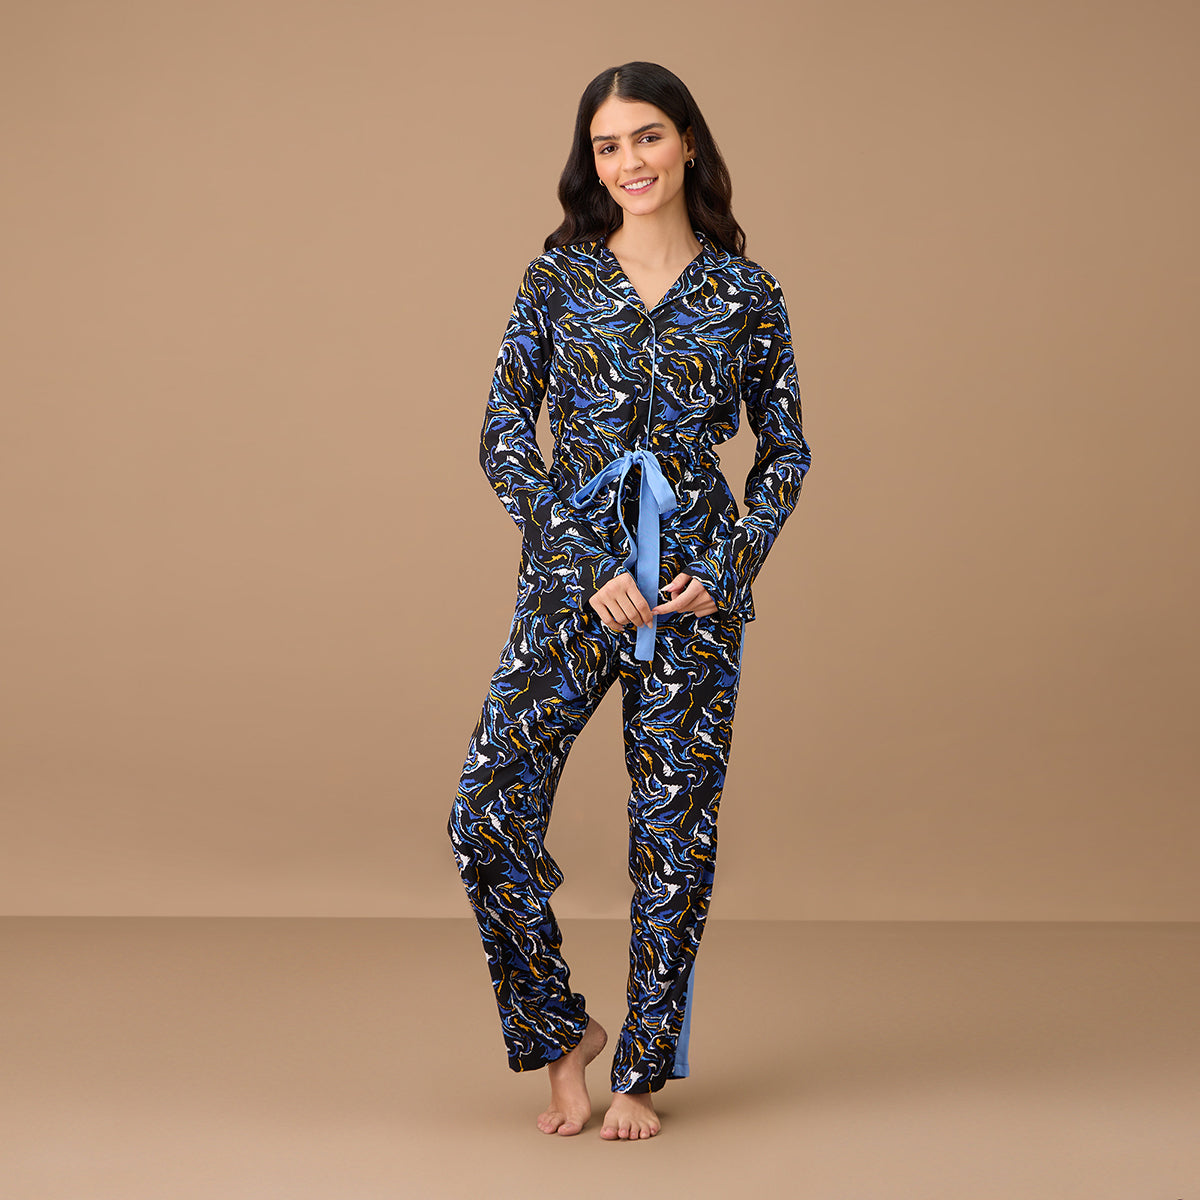 Nykd By Nykaa Style Me Up Rayon Set - NYS904 - Black Print